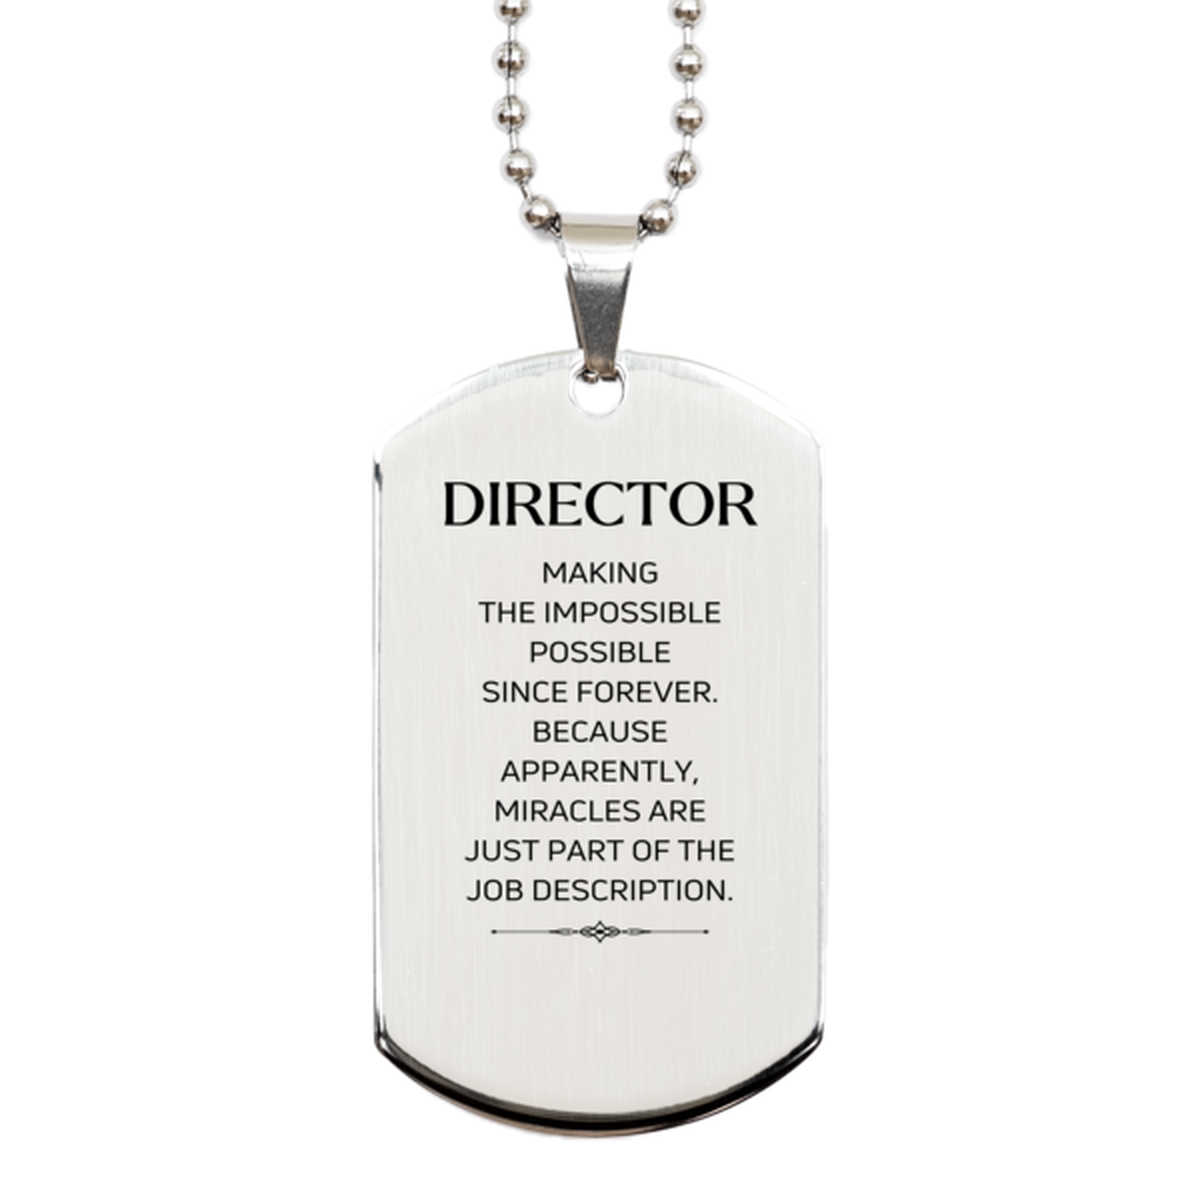 Funny Director Gifts, Miracles are just part of the job description, Inspirational Birthday Silver Dog Tag For Director, Men, Women, Coworkers, Friends, Boss